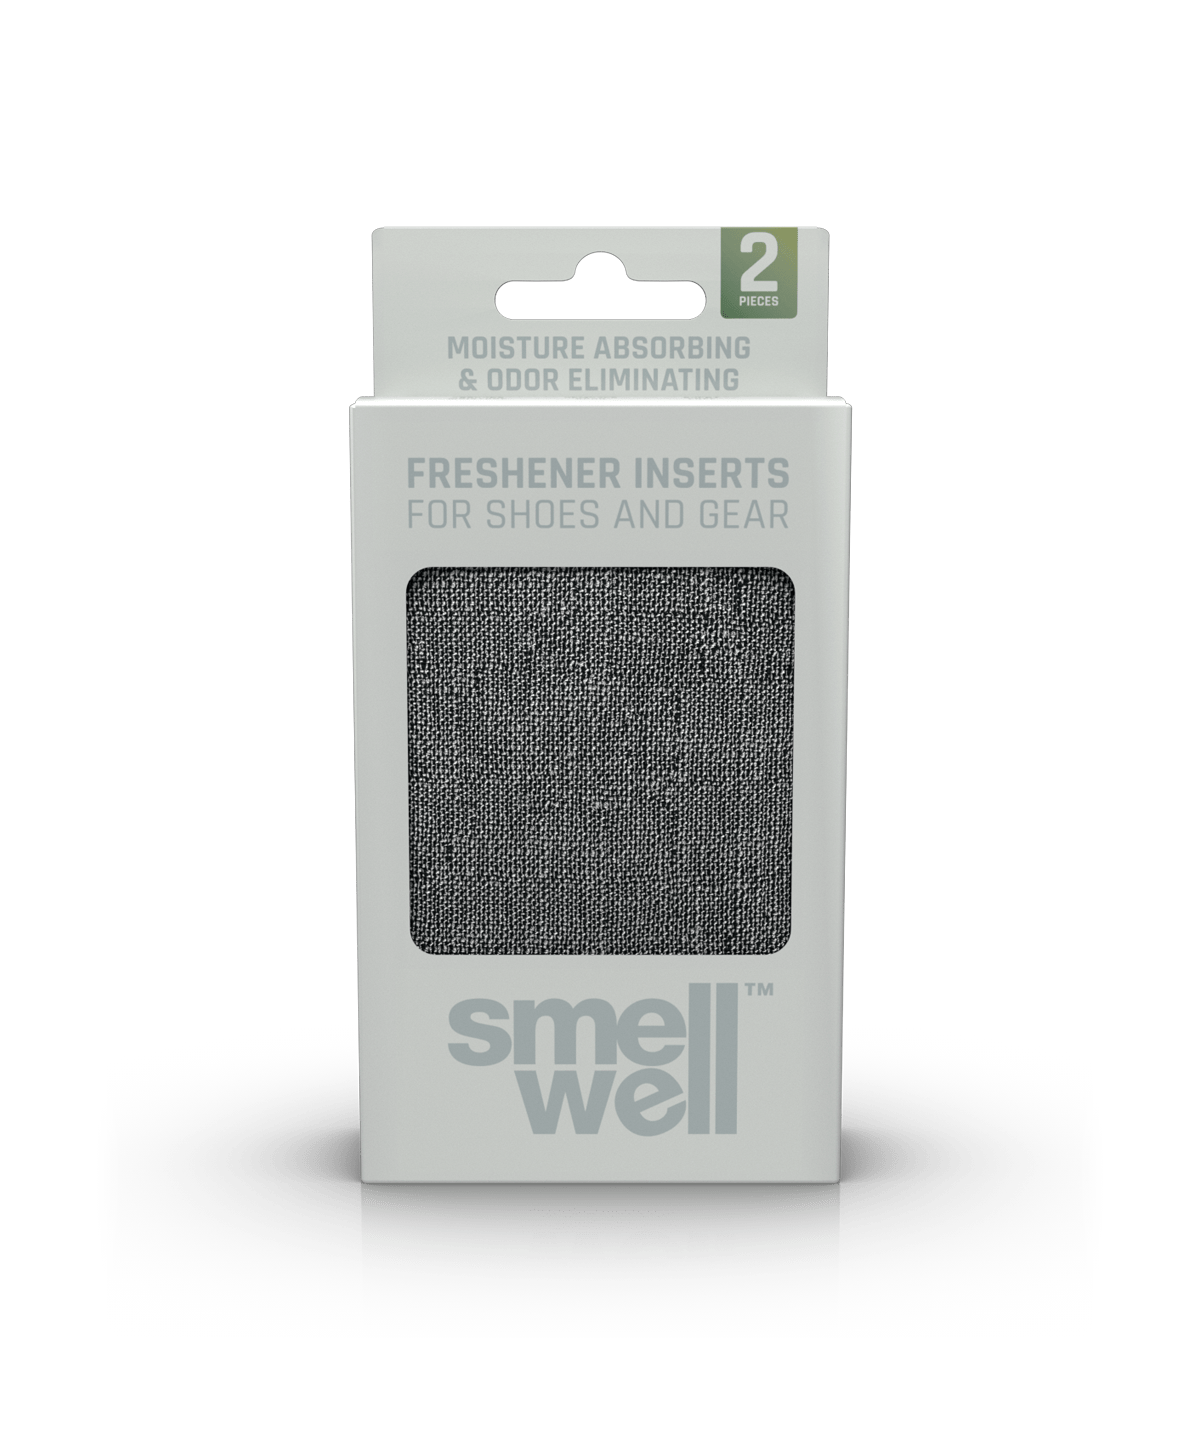 A package of SmellWell Sensitive - Grey